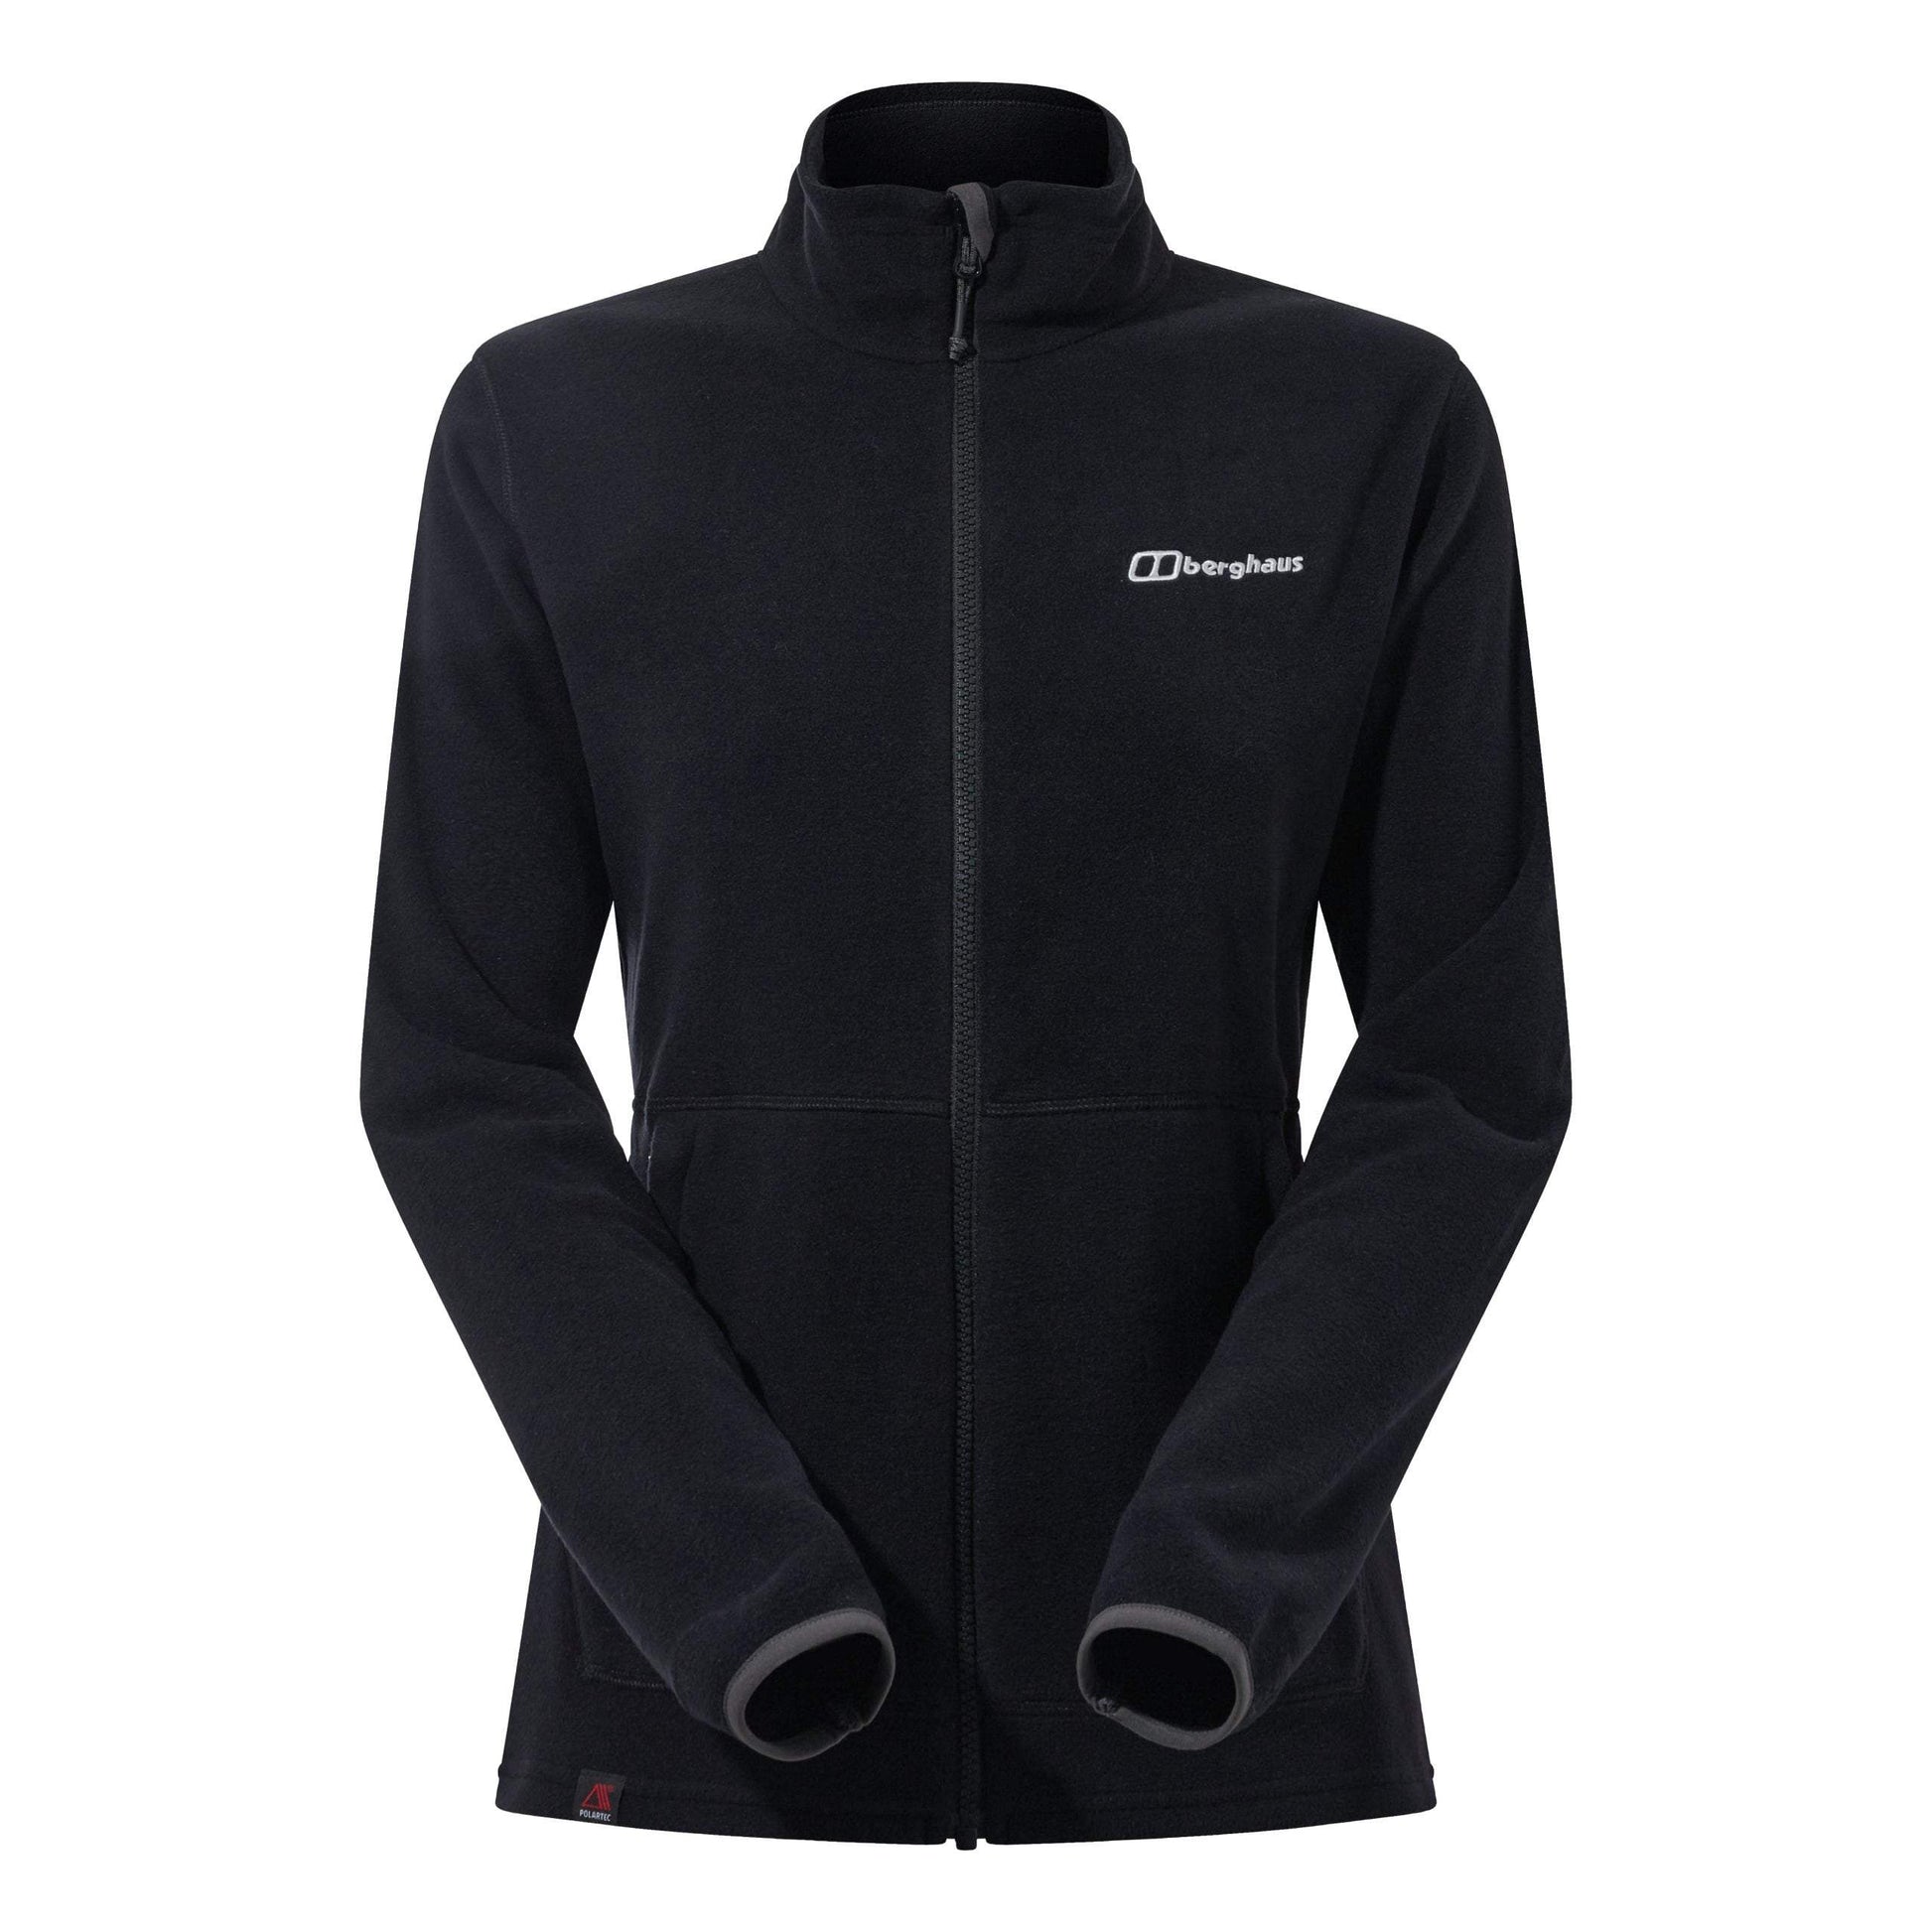 Berghaus Women’s Prism 2.0 Micro IA FL Jkt - The Luxury Promotional Gifts Company Limited